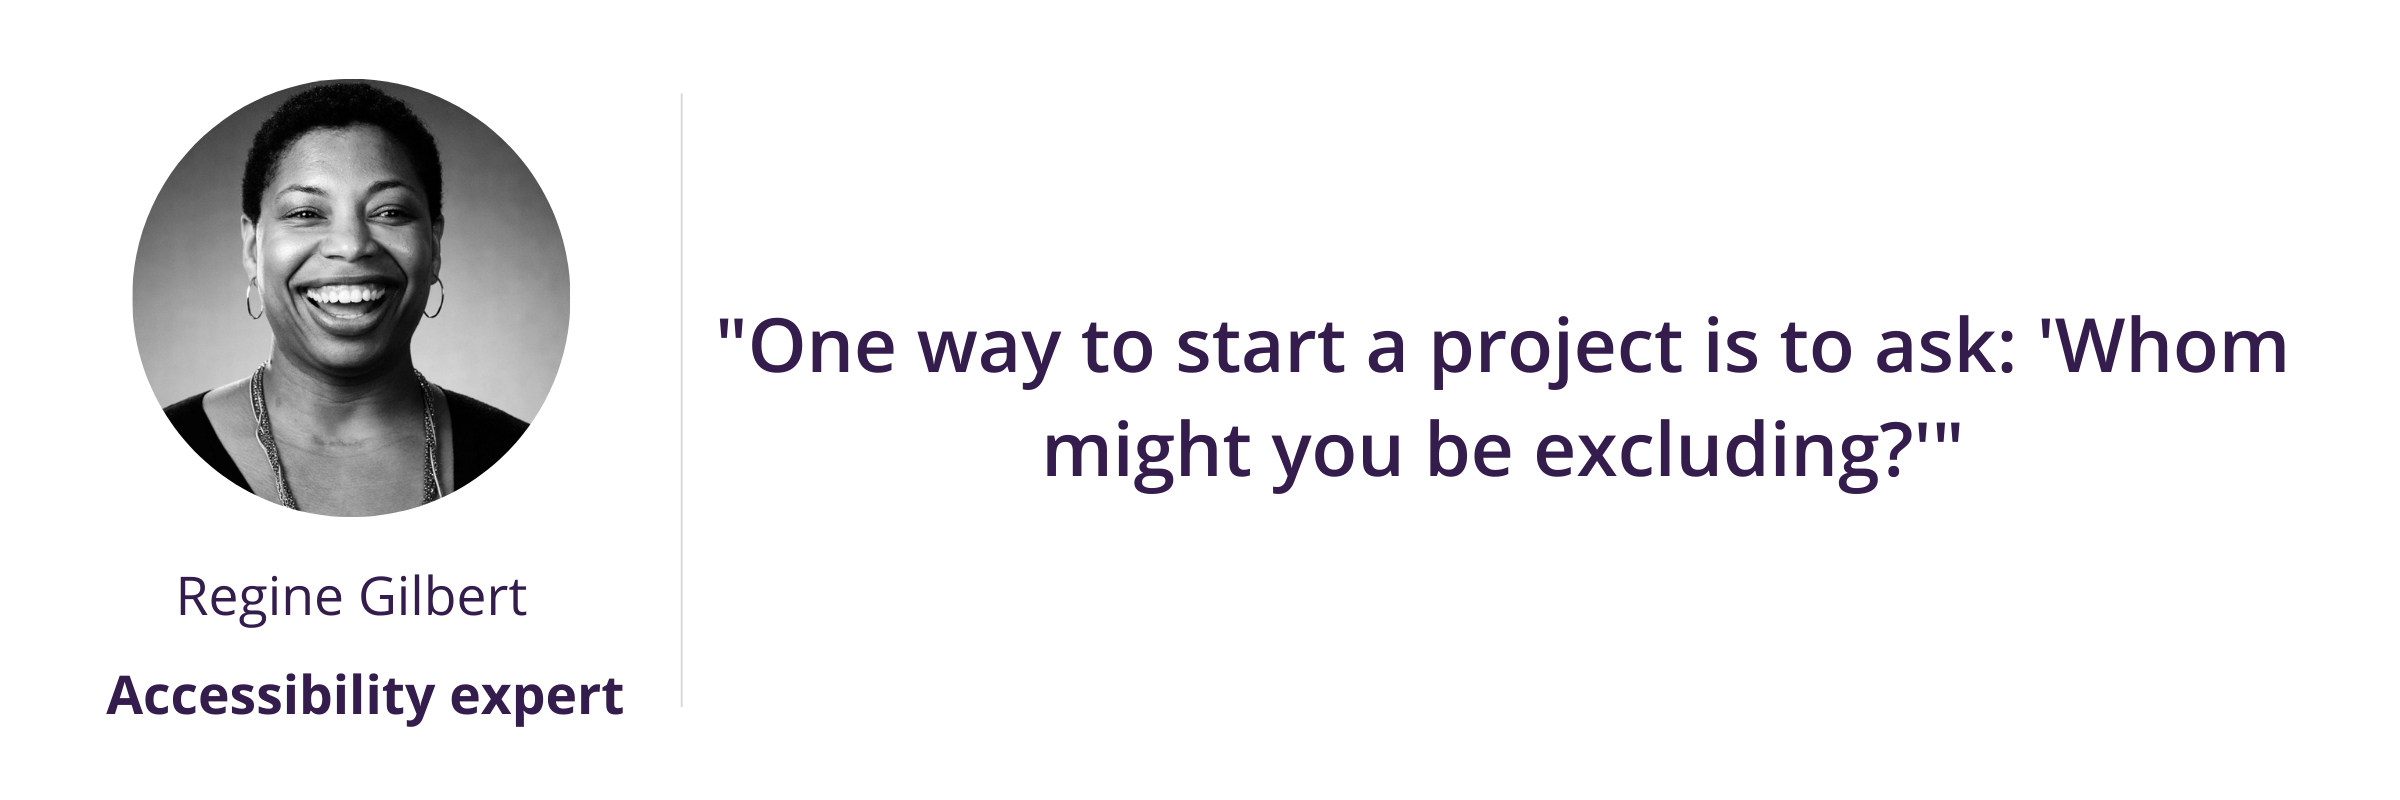 "One way to start a project is to ask: 'Whom might you be excluding?'"